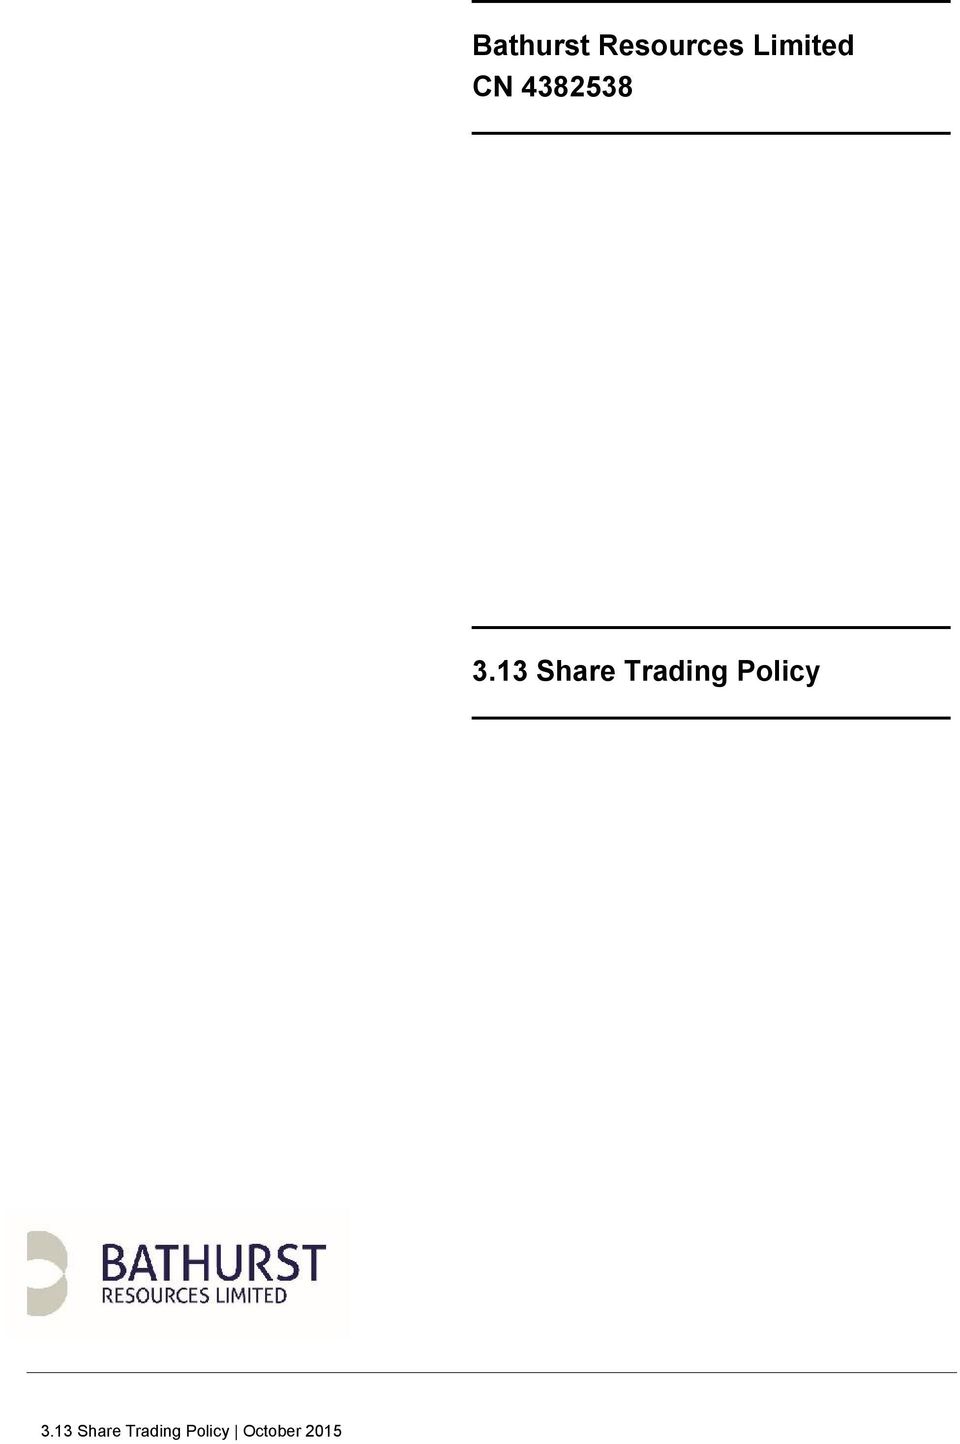 13 Share Trading Policy 3.